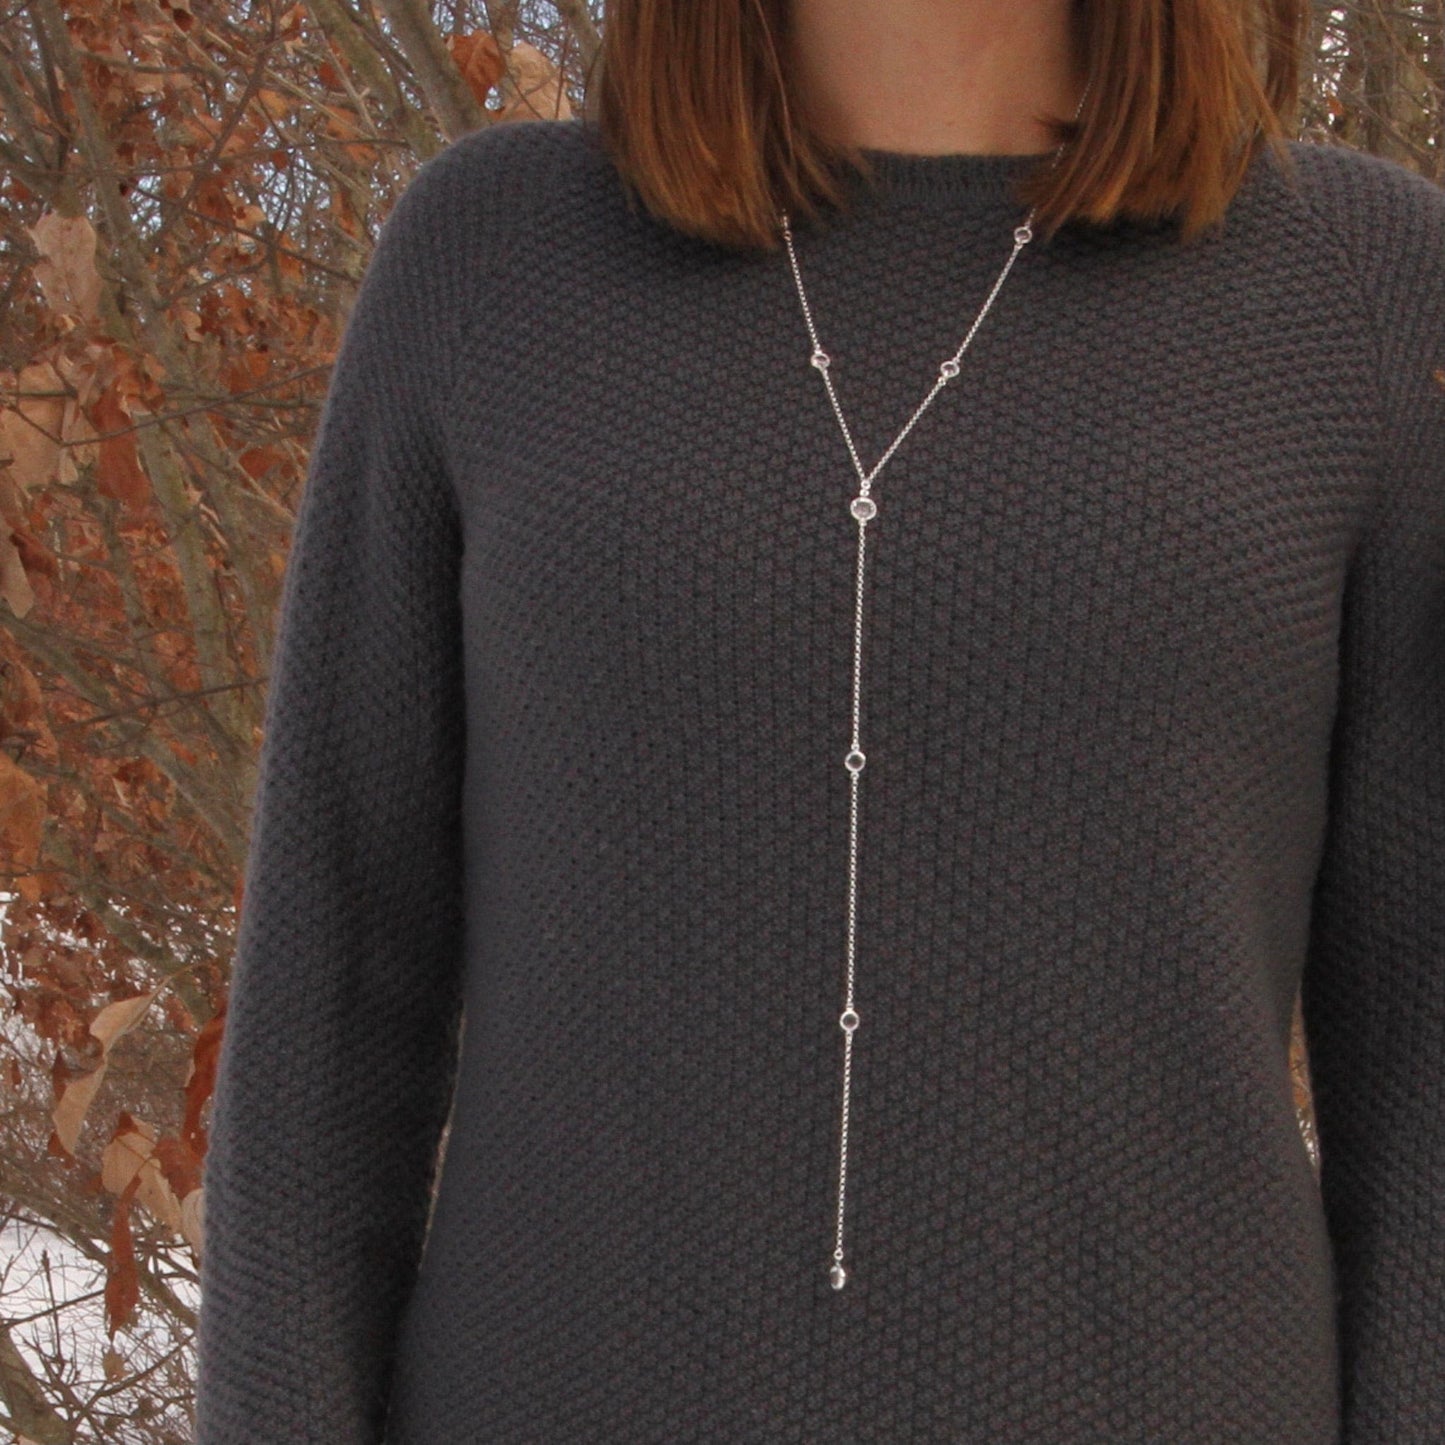 NKL Long Y-Necklace with Crystal Stations